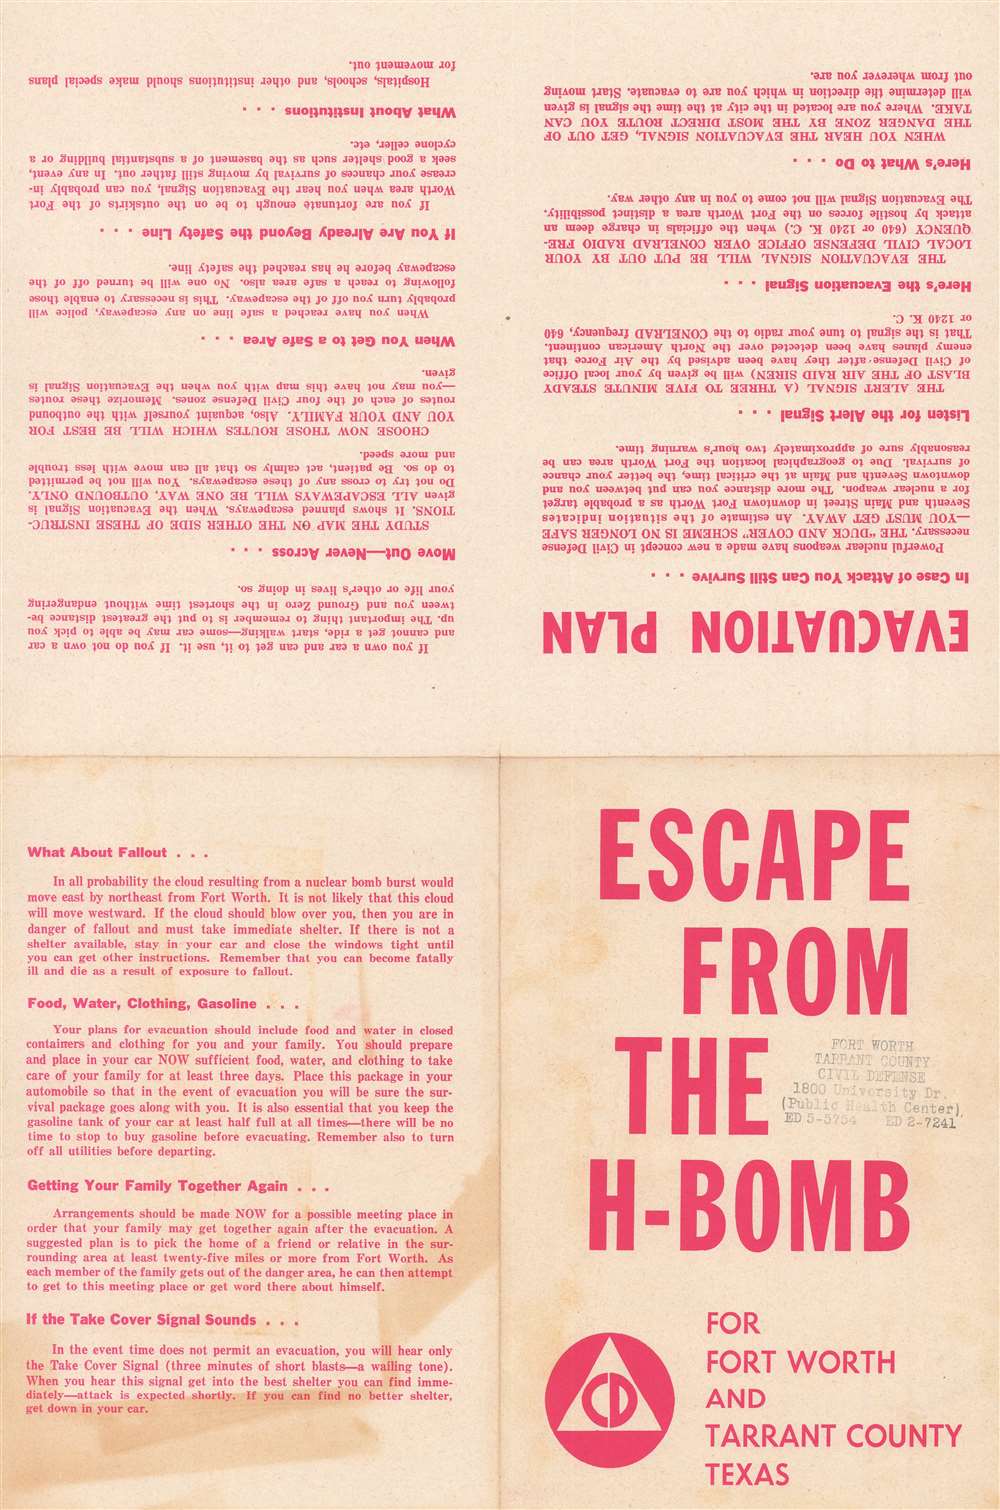 Escape the H-Bomb for Forth Worth and Tarrant County Texas. - Alternate View 1